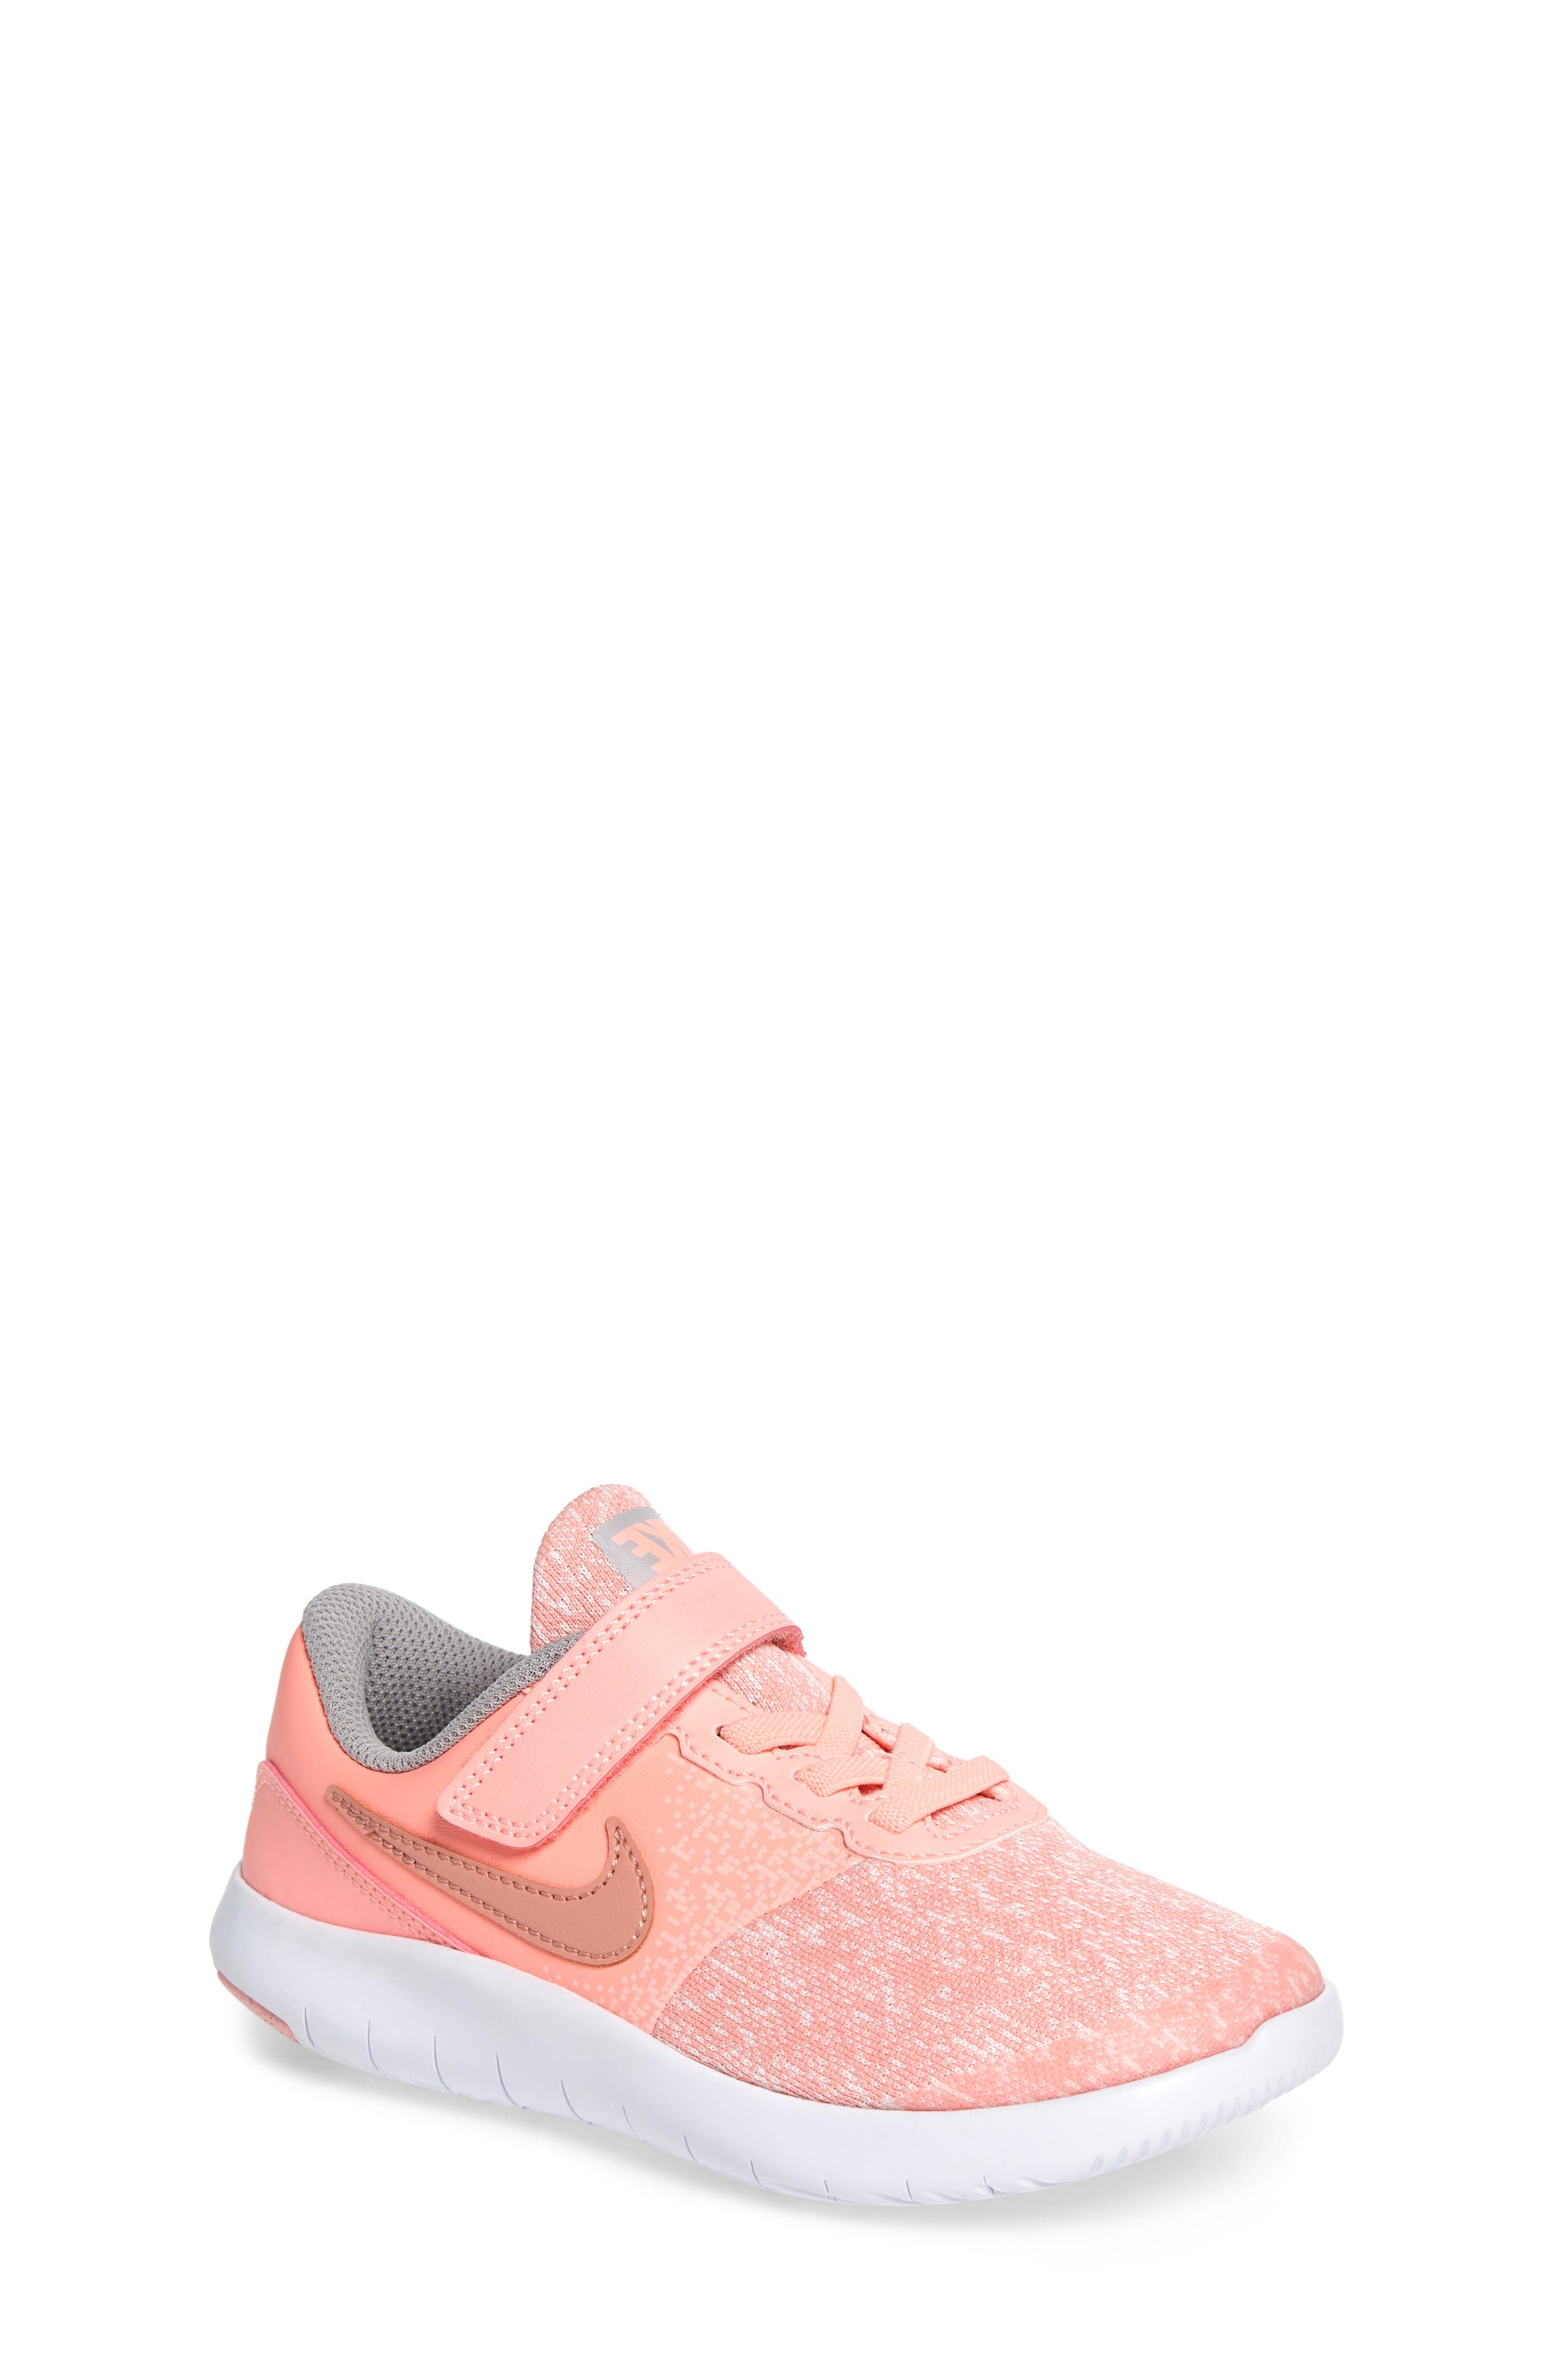 nike flex contact dusty pink